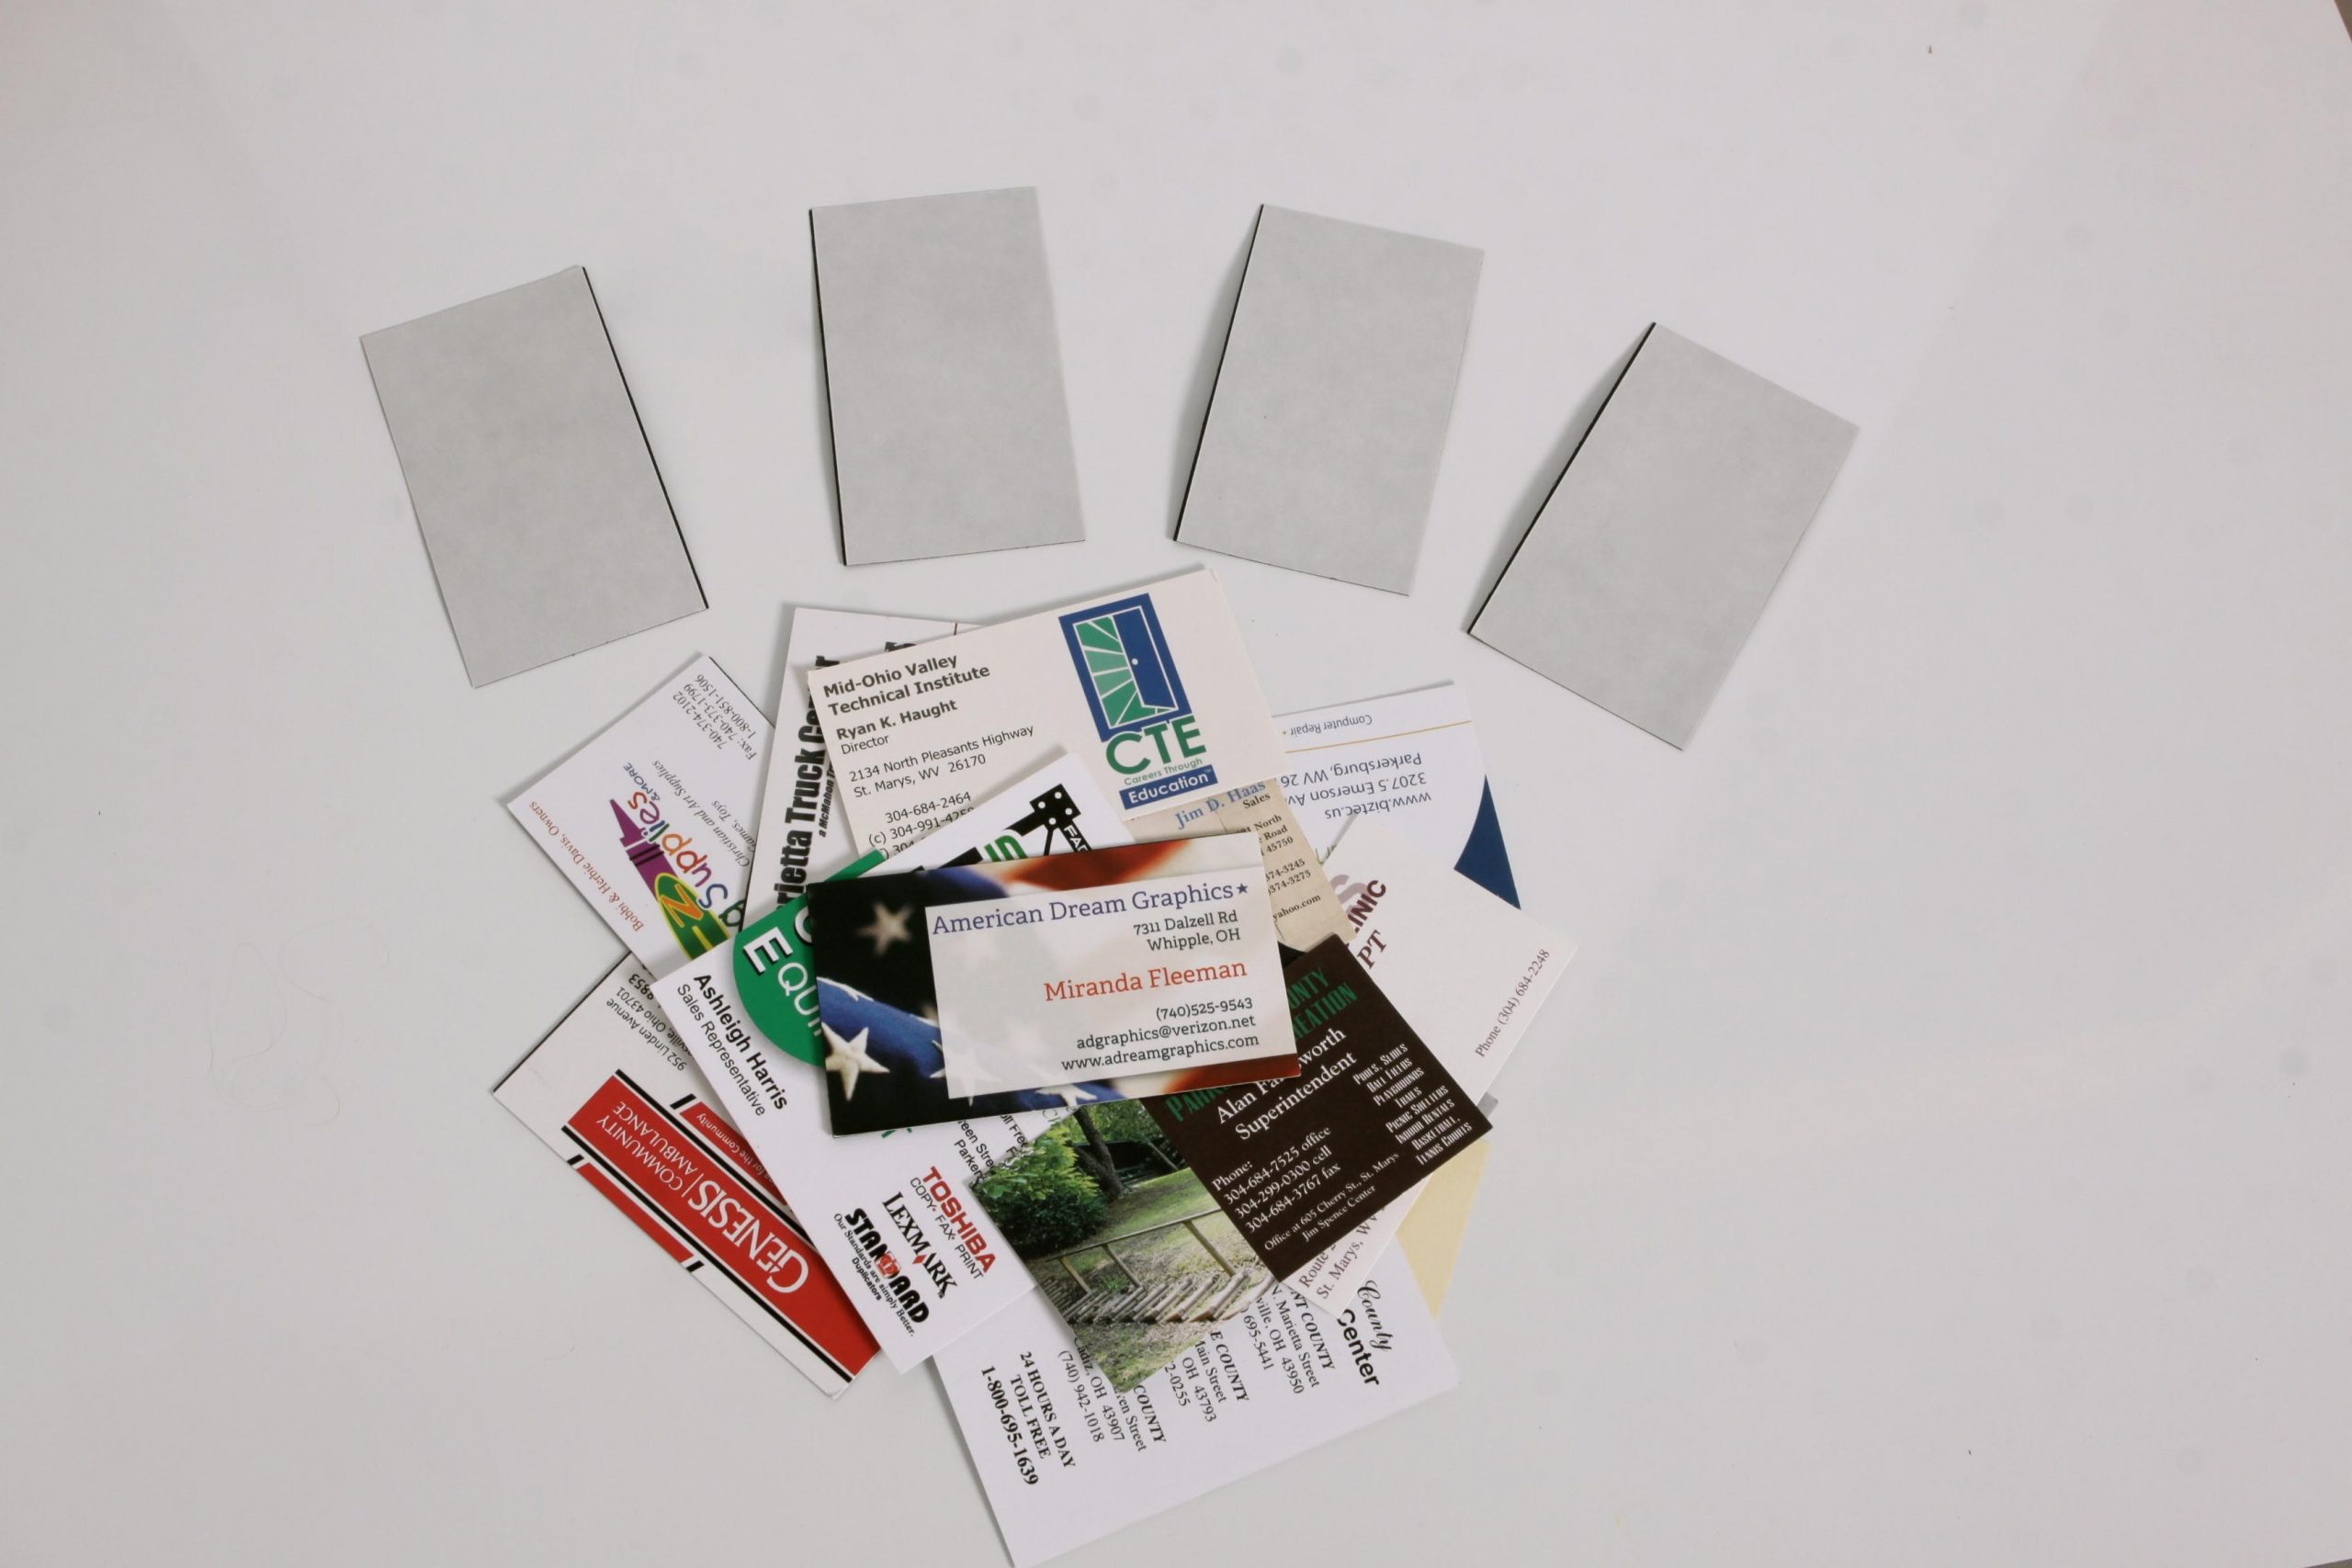 3.5 x 2 Inch Business Card Strong Flexible Self-Adhesive Magnetic